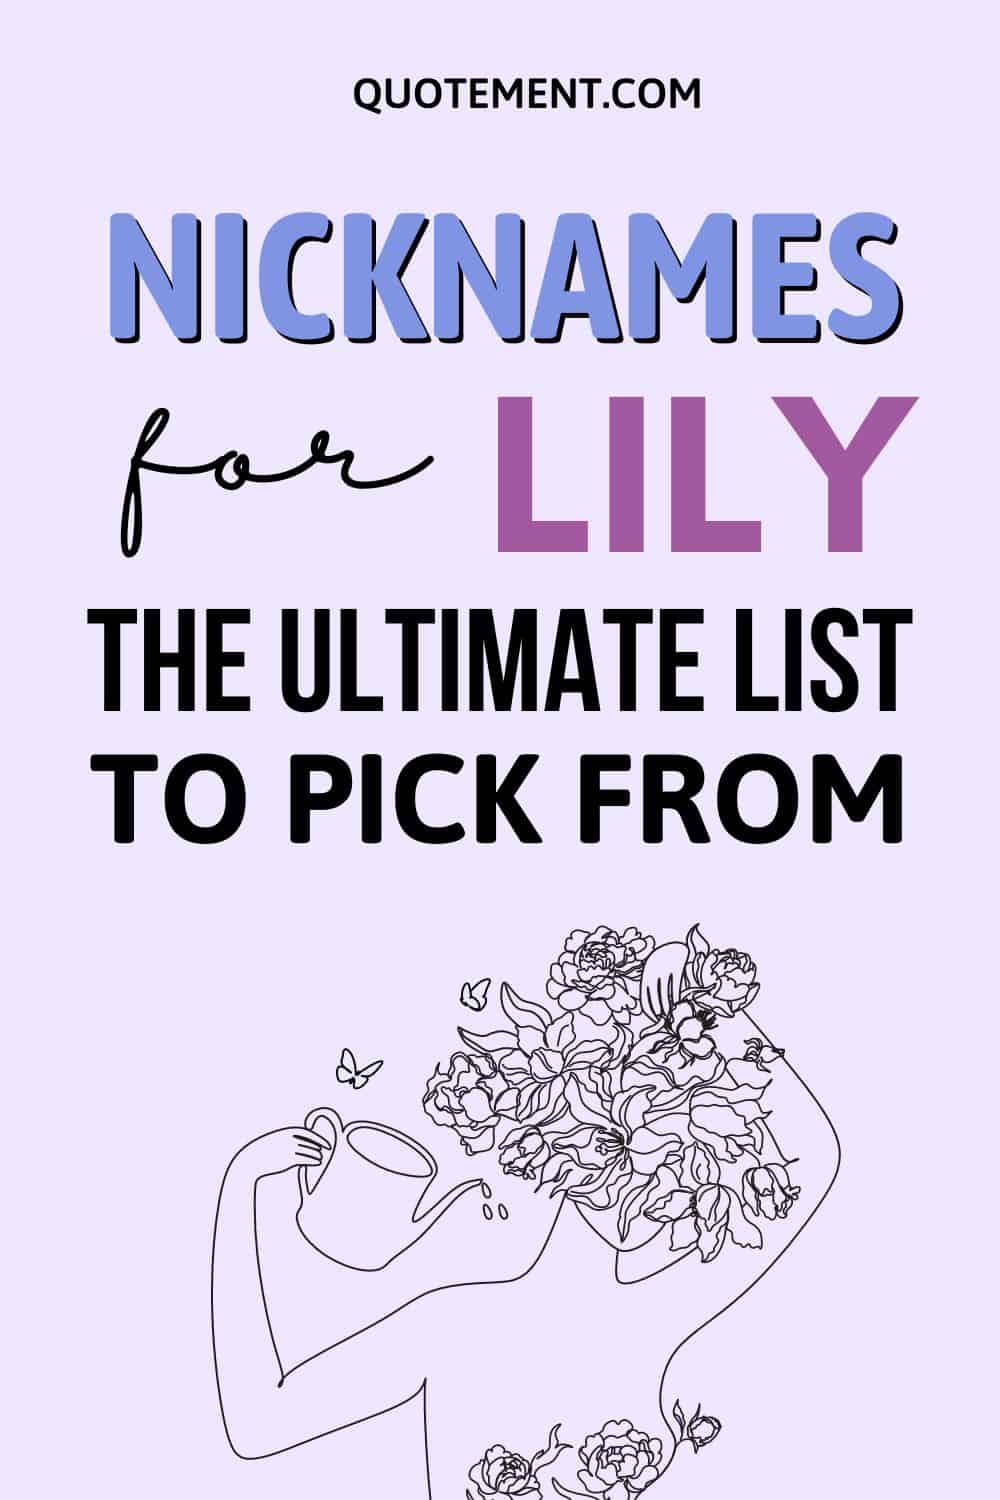 Nicknames For Lily 100 Ideas You Can Use Right Now!